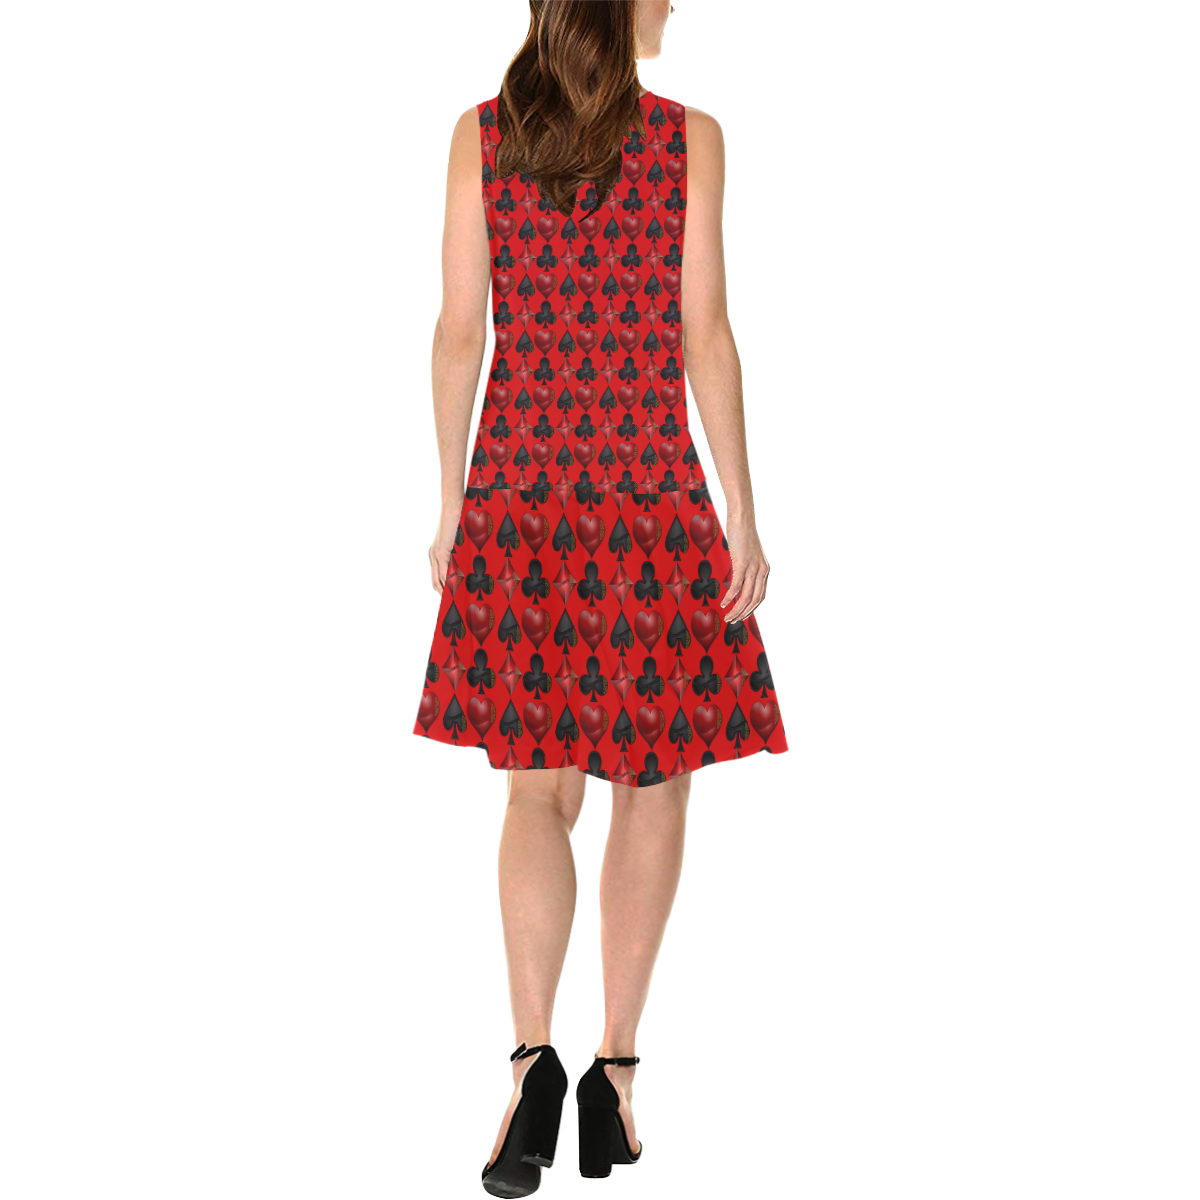 Las Vegas Black and Red Poker Casino Card Shapes on Red Sleeveless Splicing Shift Dress(Model D17)